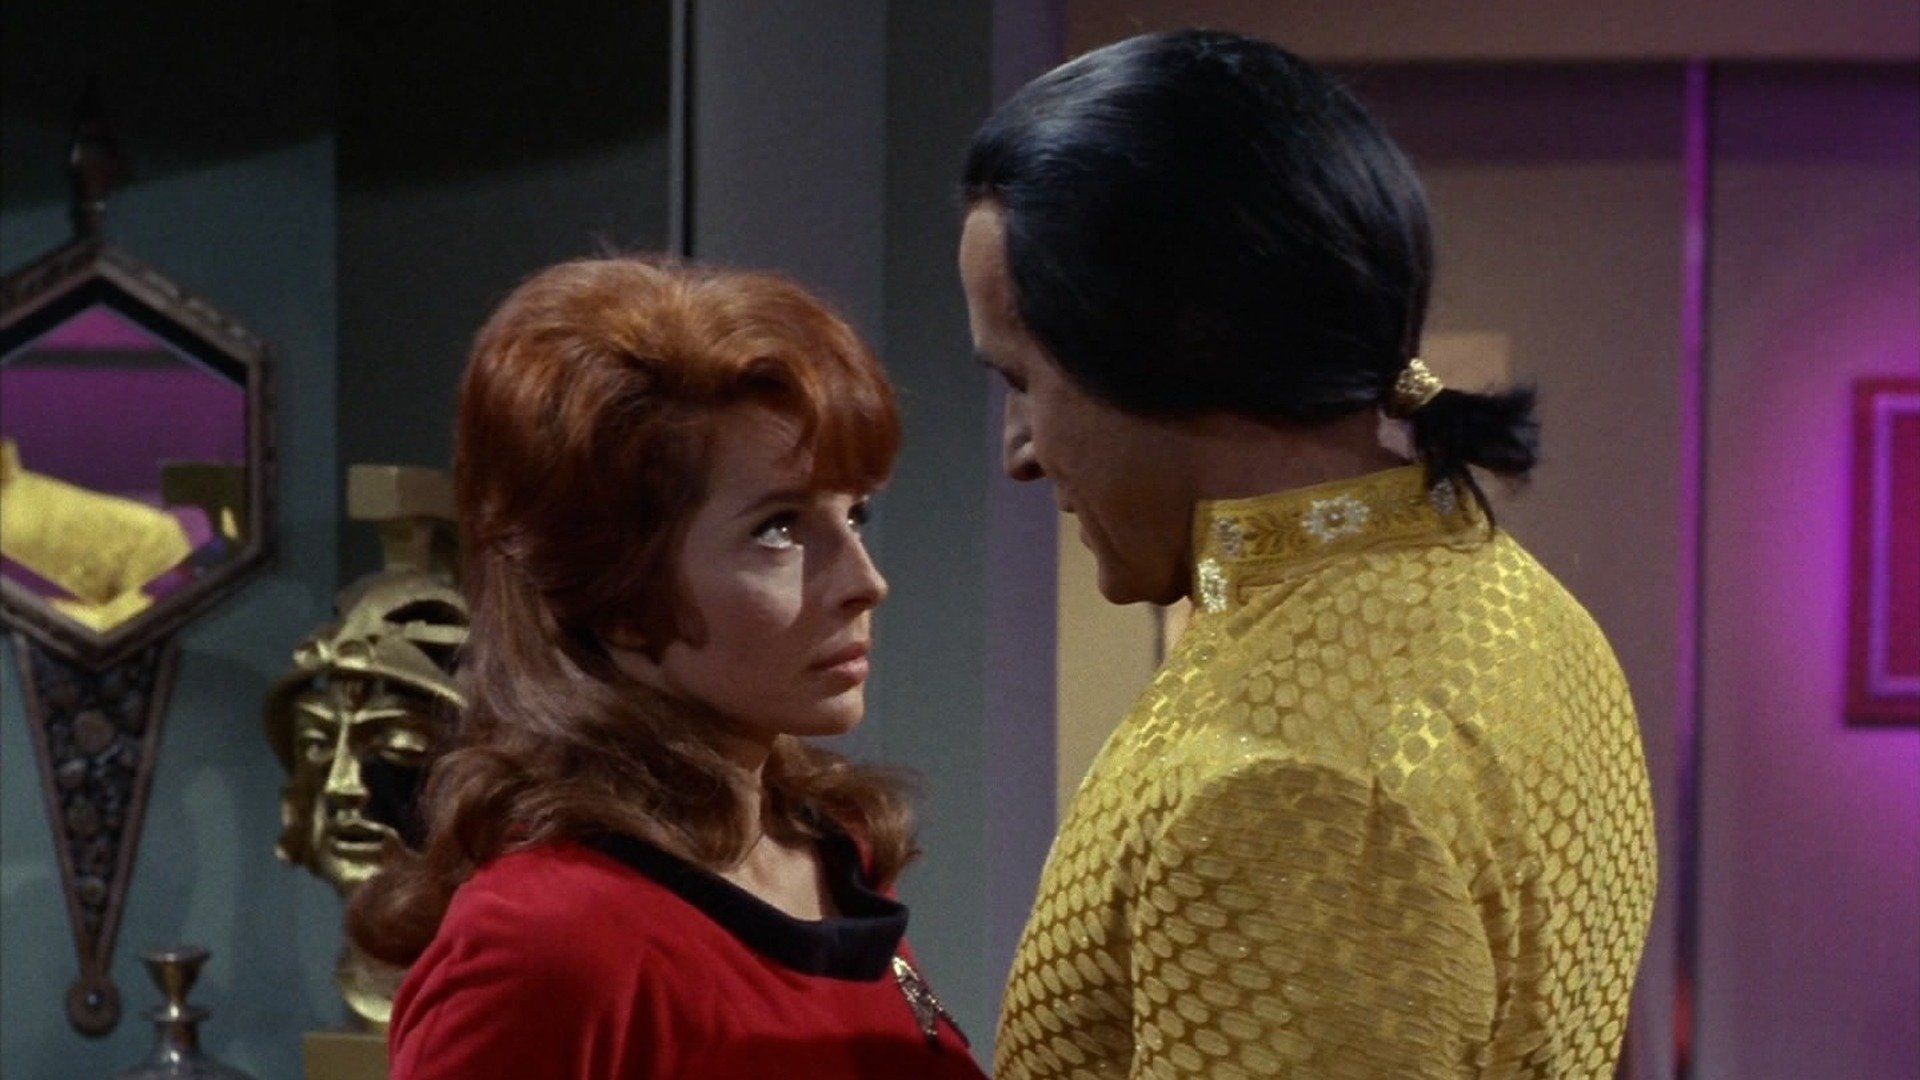 22. Space Seed